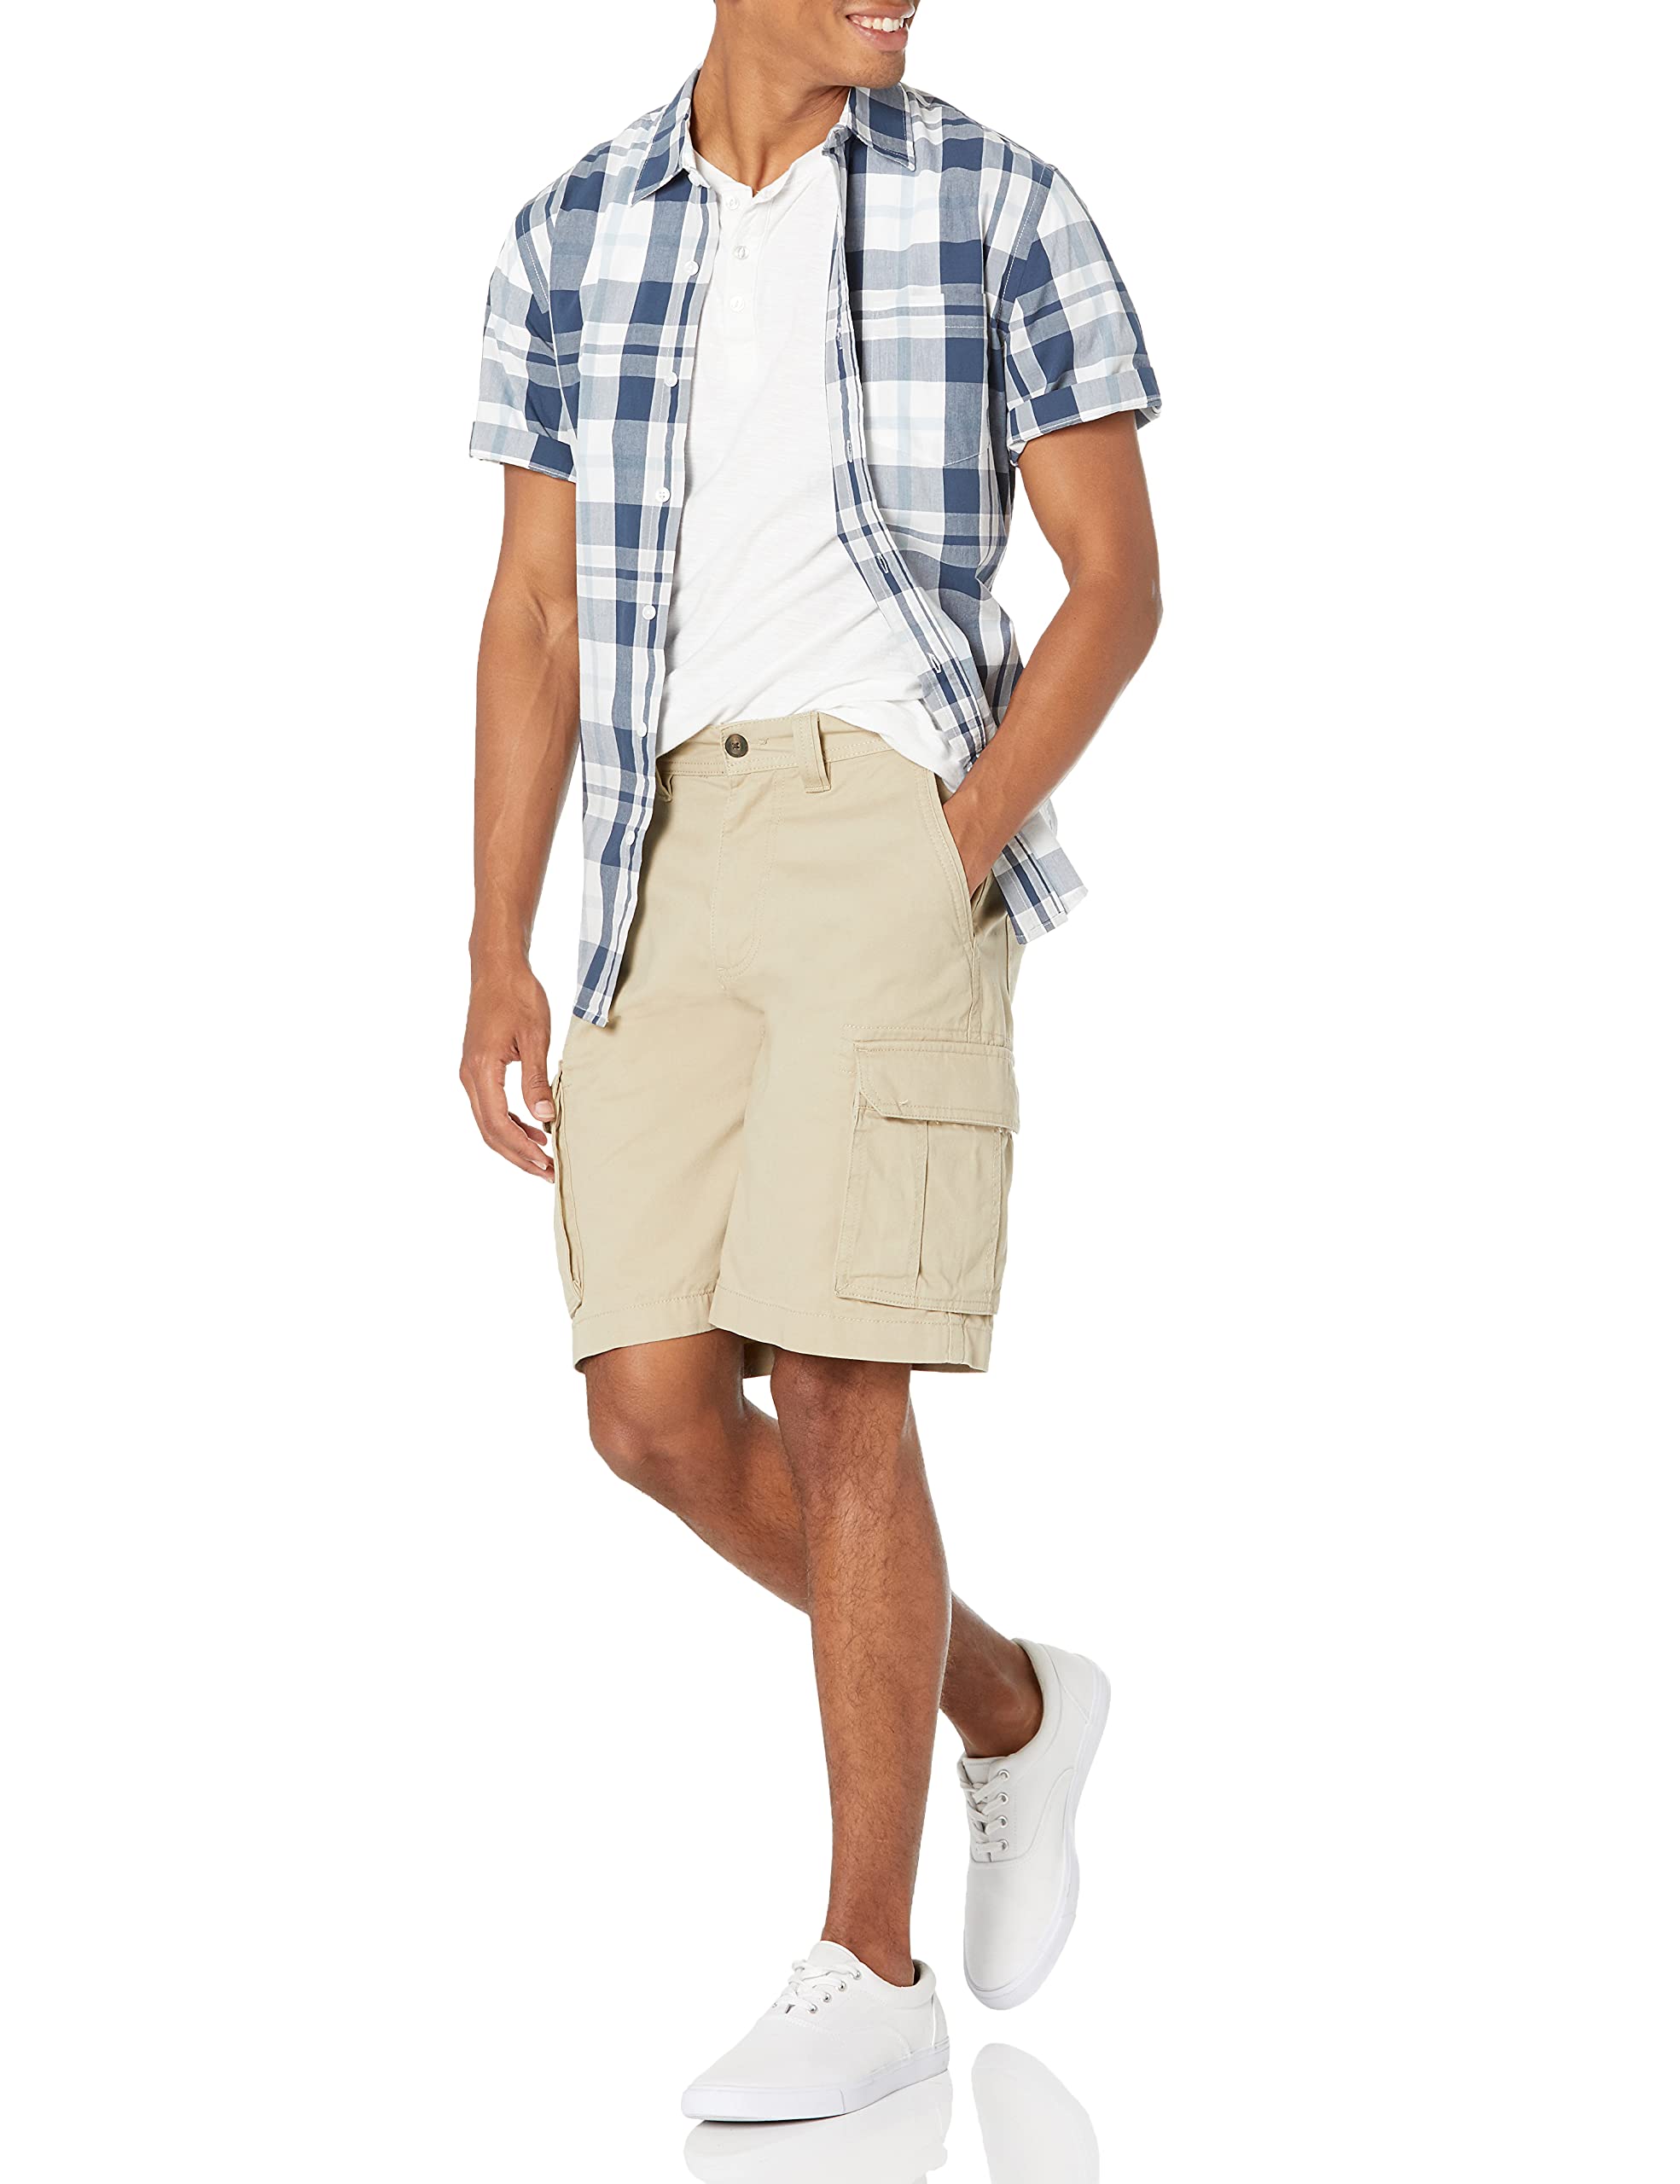 Amazon Essentials Men's Classic-Fit Cargo Short (Available in Big & Tall)